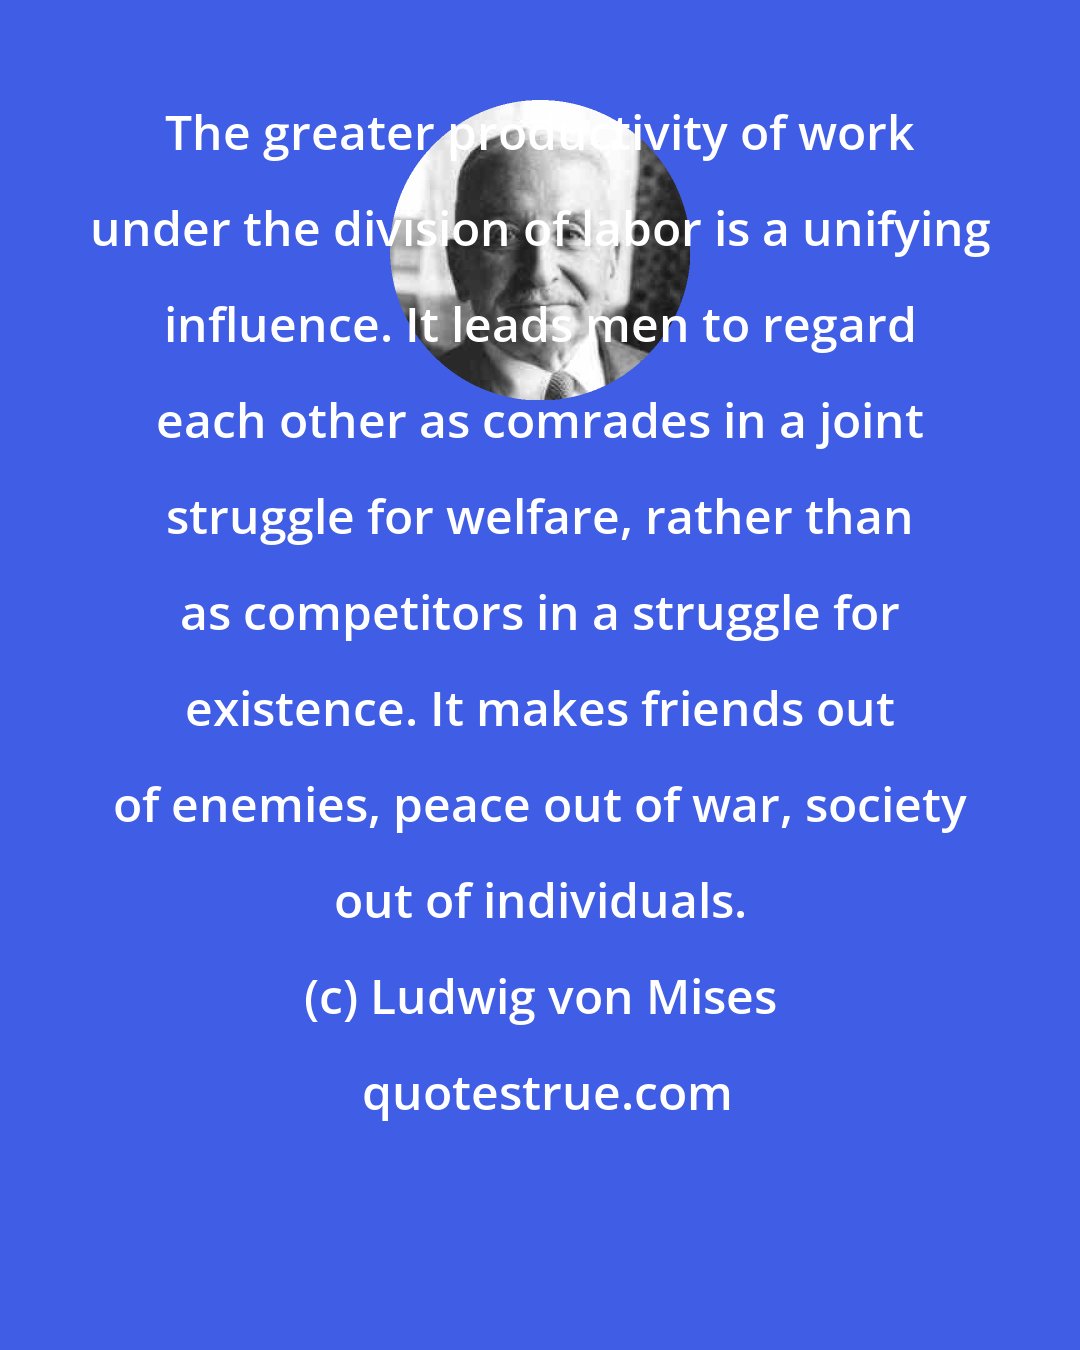 Ludwig von Mises: The greater productivity of work under the division of labor is a unifying influence. It leads men to regard each other as comrades in a joint struggle for welfare, rather than as competitors in a struggle for existence. It makes friends out of enemies, peace out of war, society out of individuals.